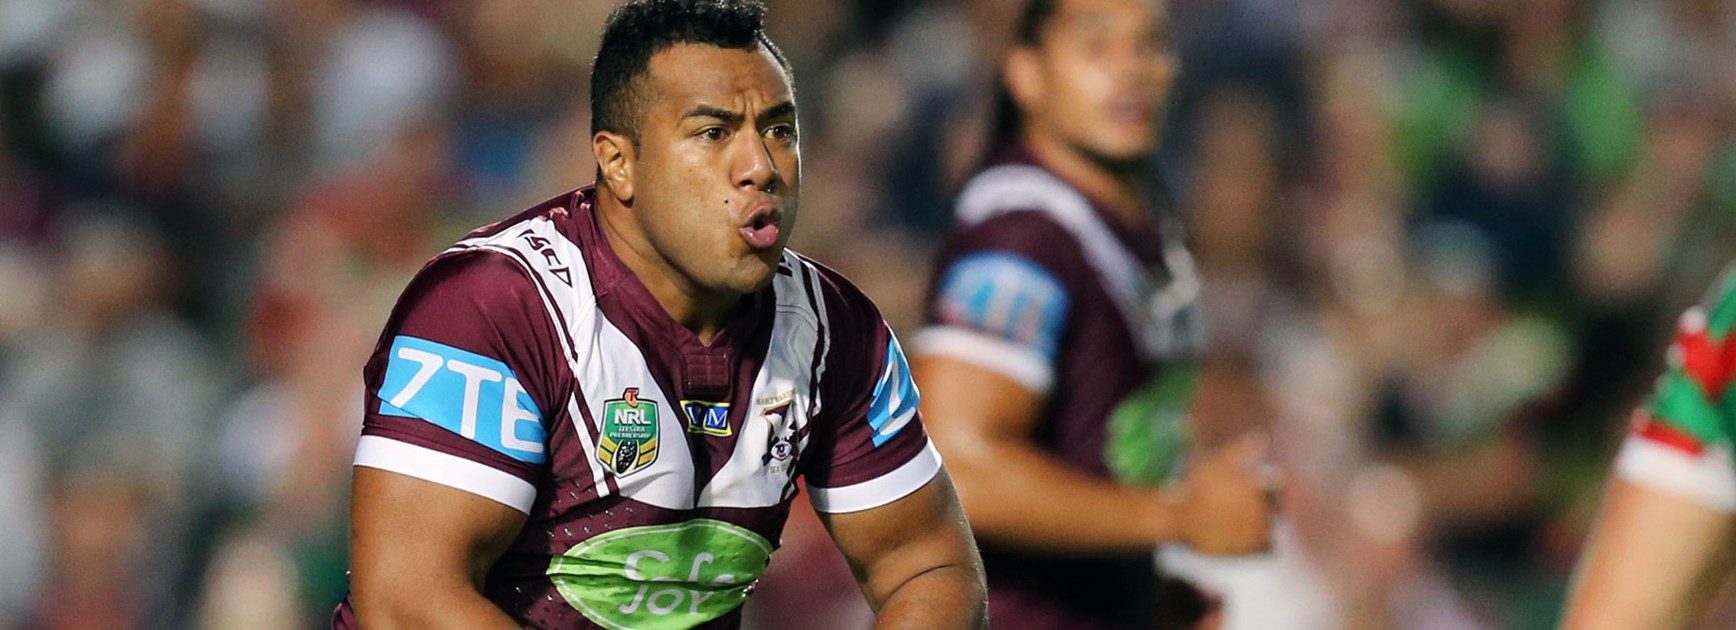 Manly prop Siosaia Vave made some damaging runs against Souths in Round 5.